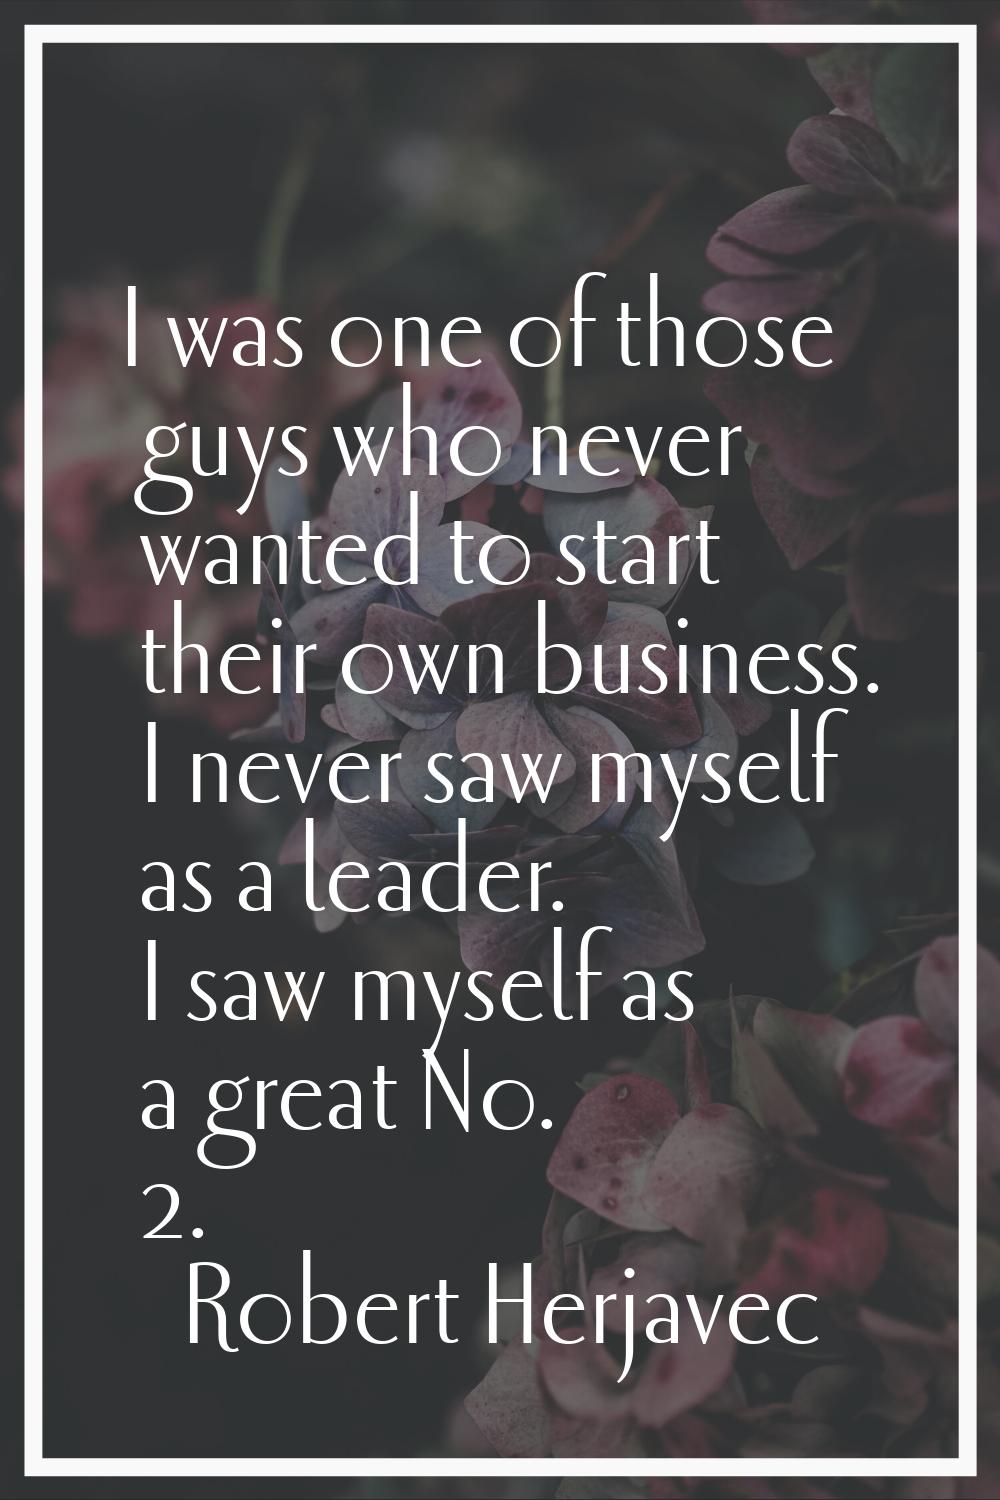 I was one of those guys who never wanted to start their own business. I never saw myself as a leade